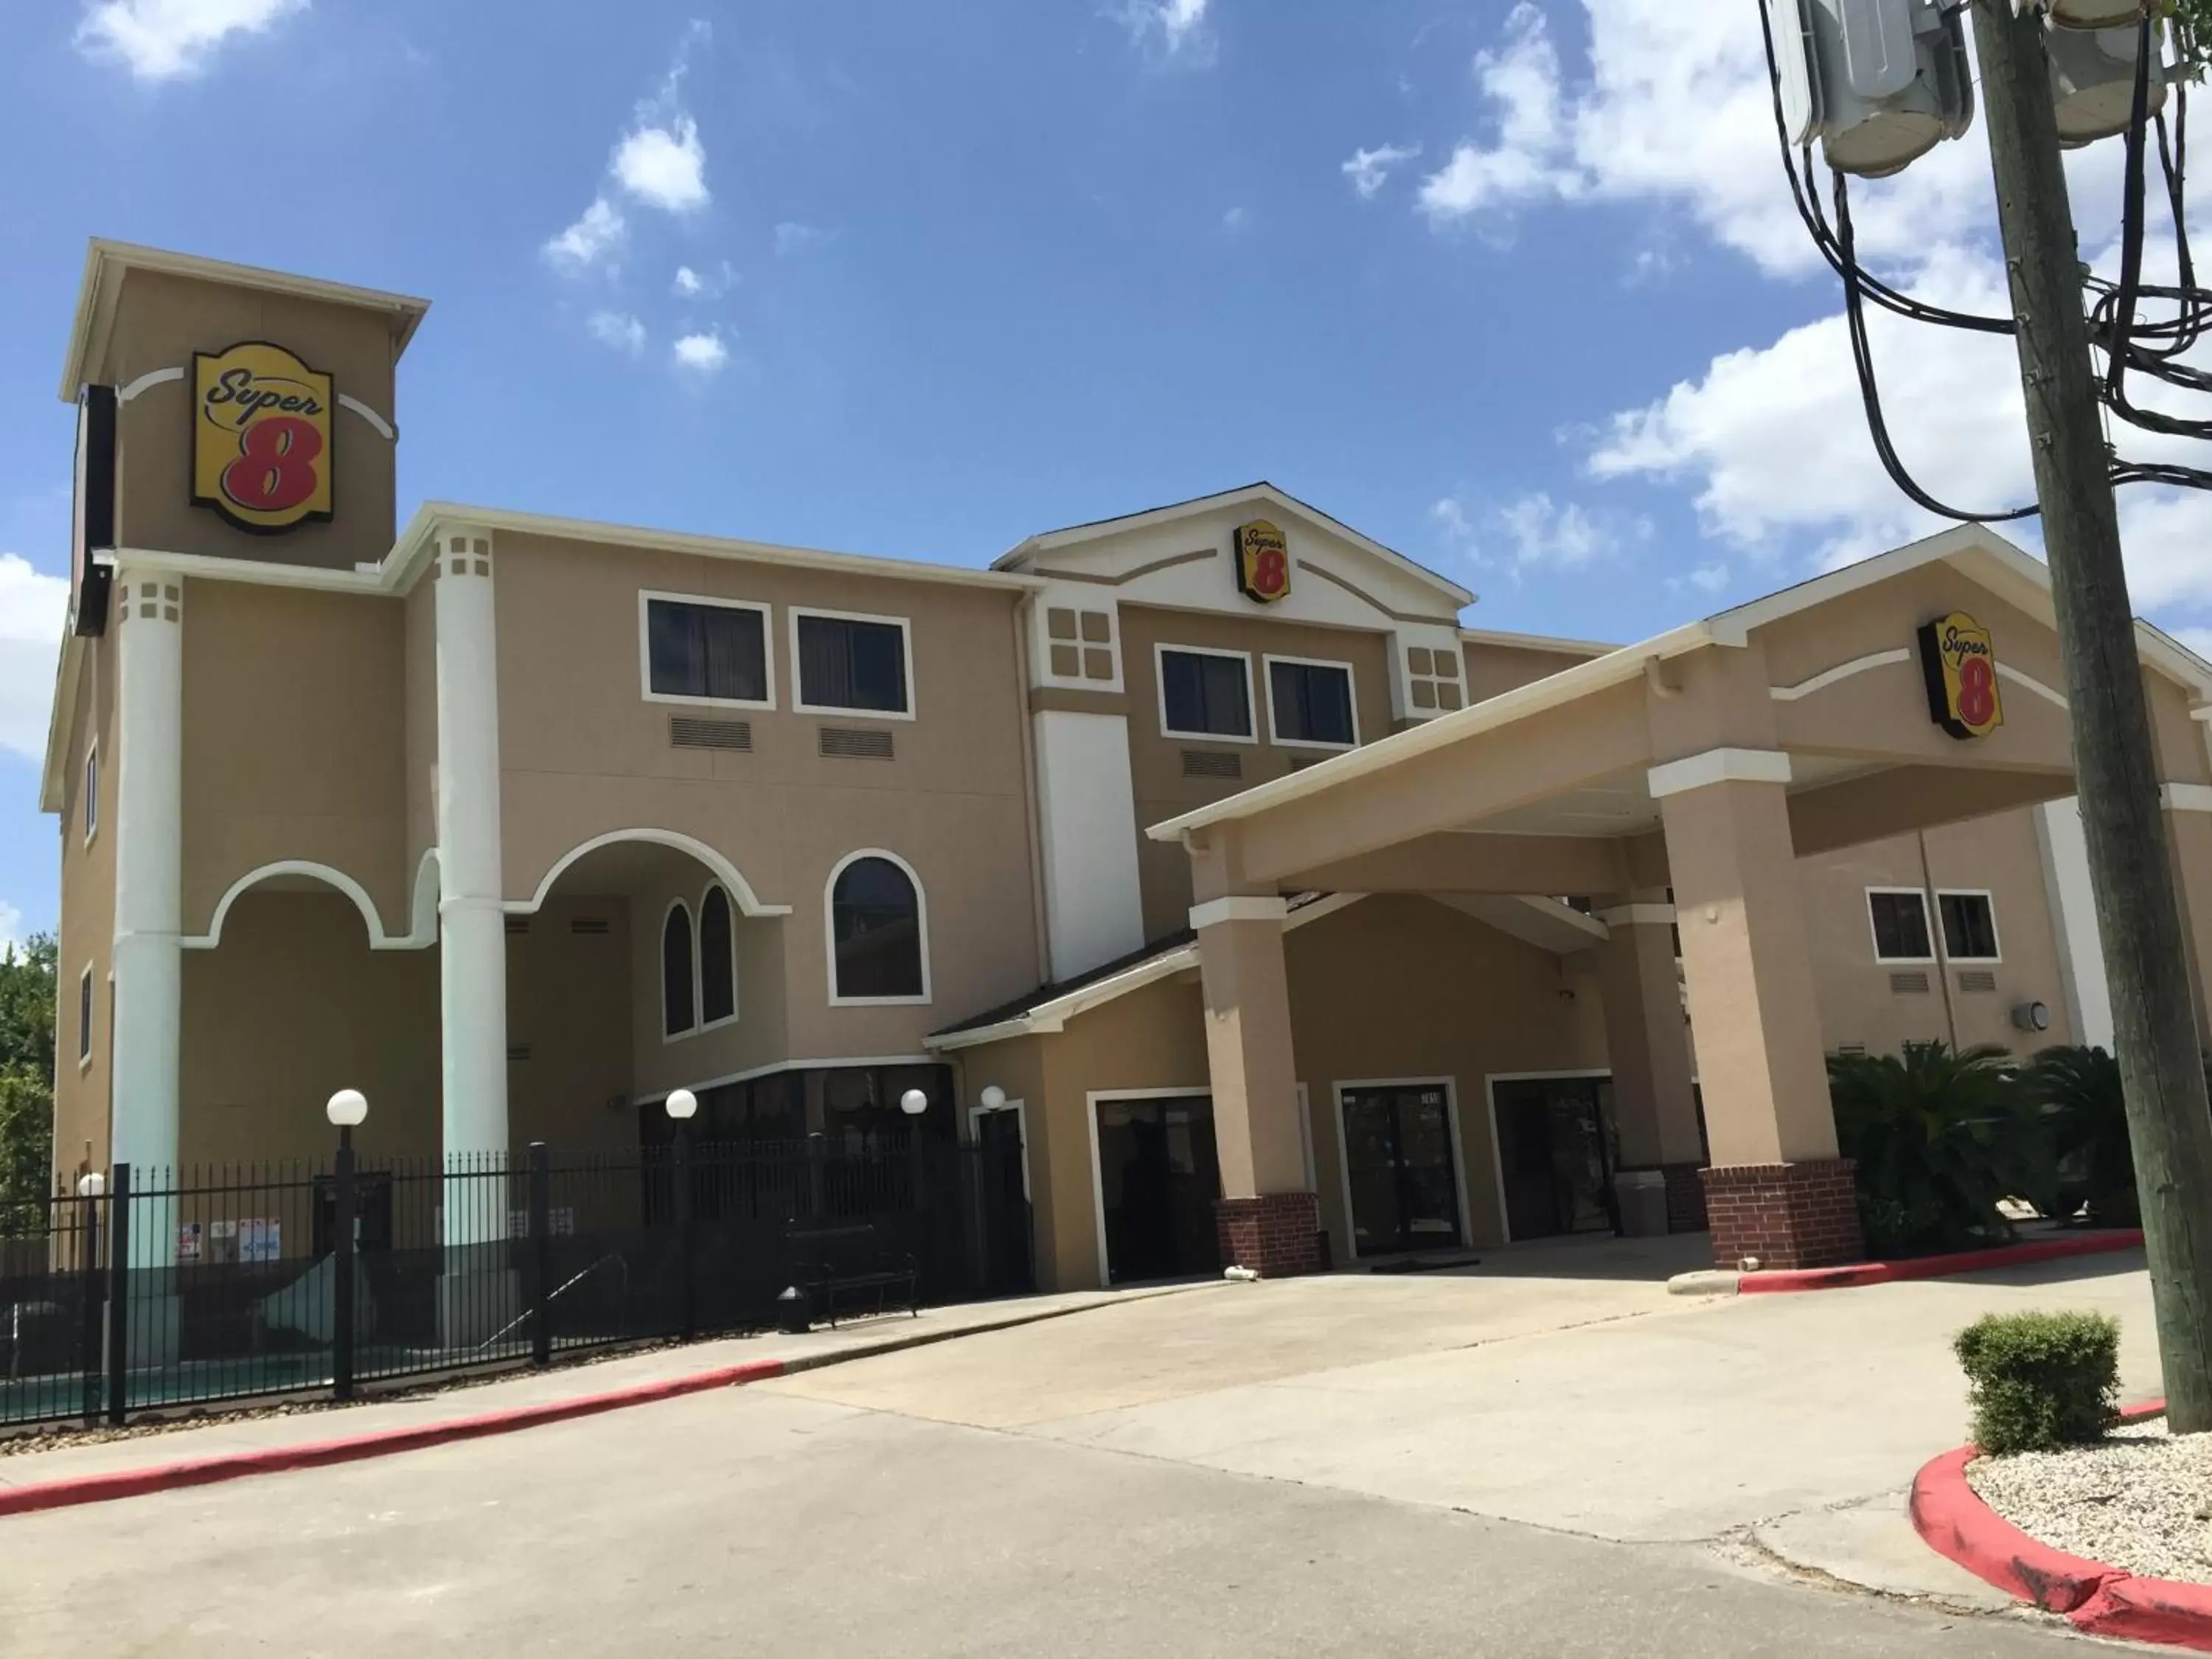 Property Building in Super 8 by Wyndham Intercontinental Houston TX